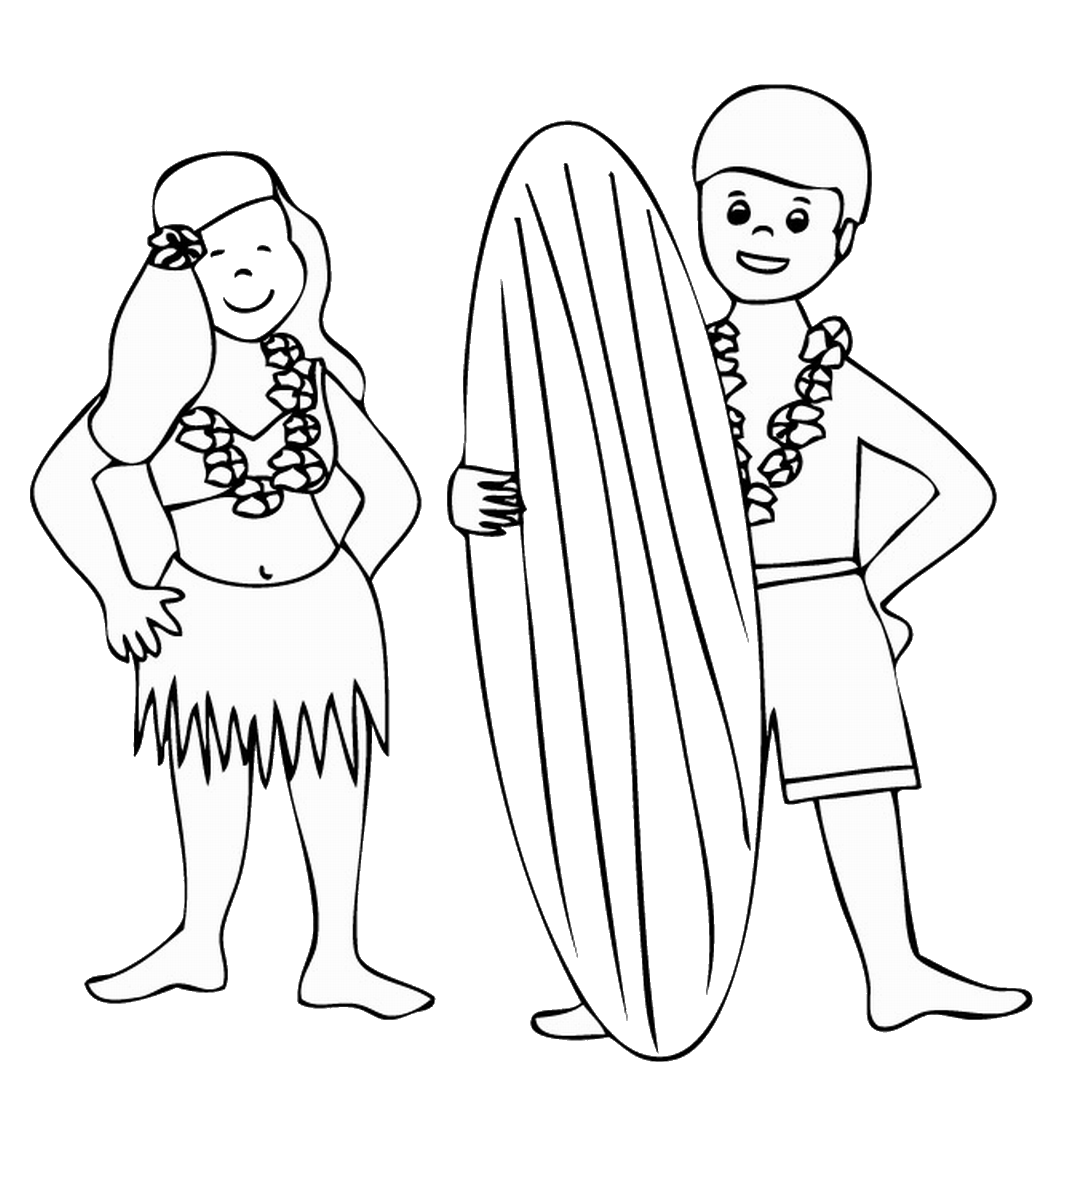 luau coloring pages luau coloring pages birthday printable luau pages coloring 